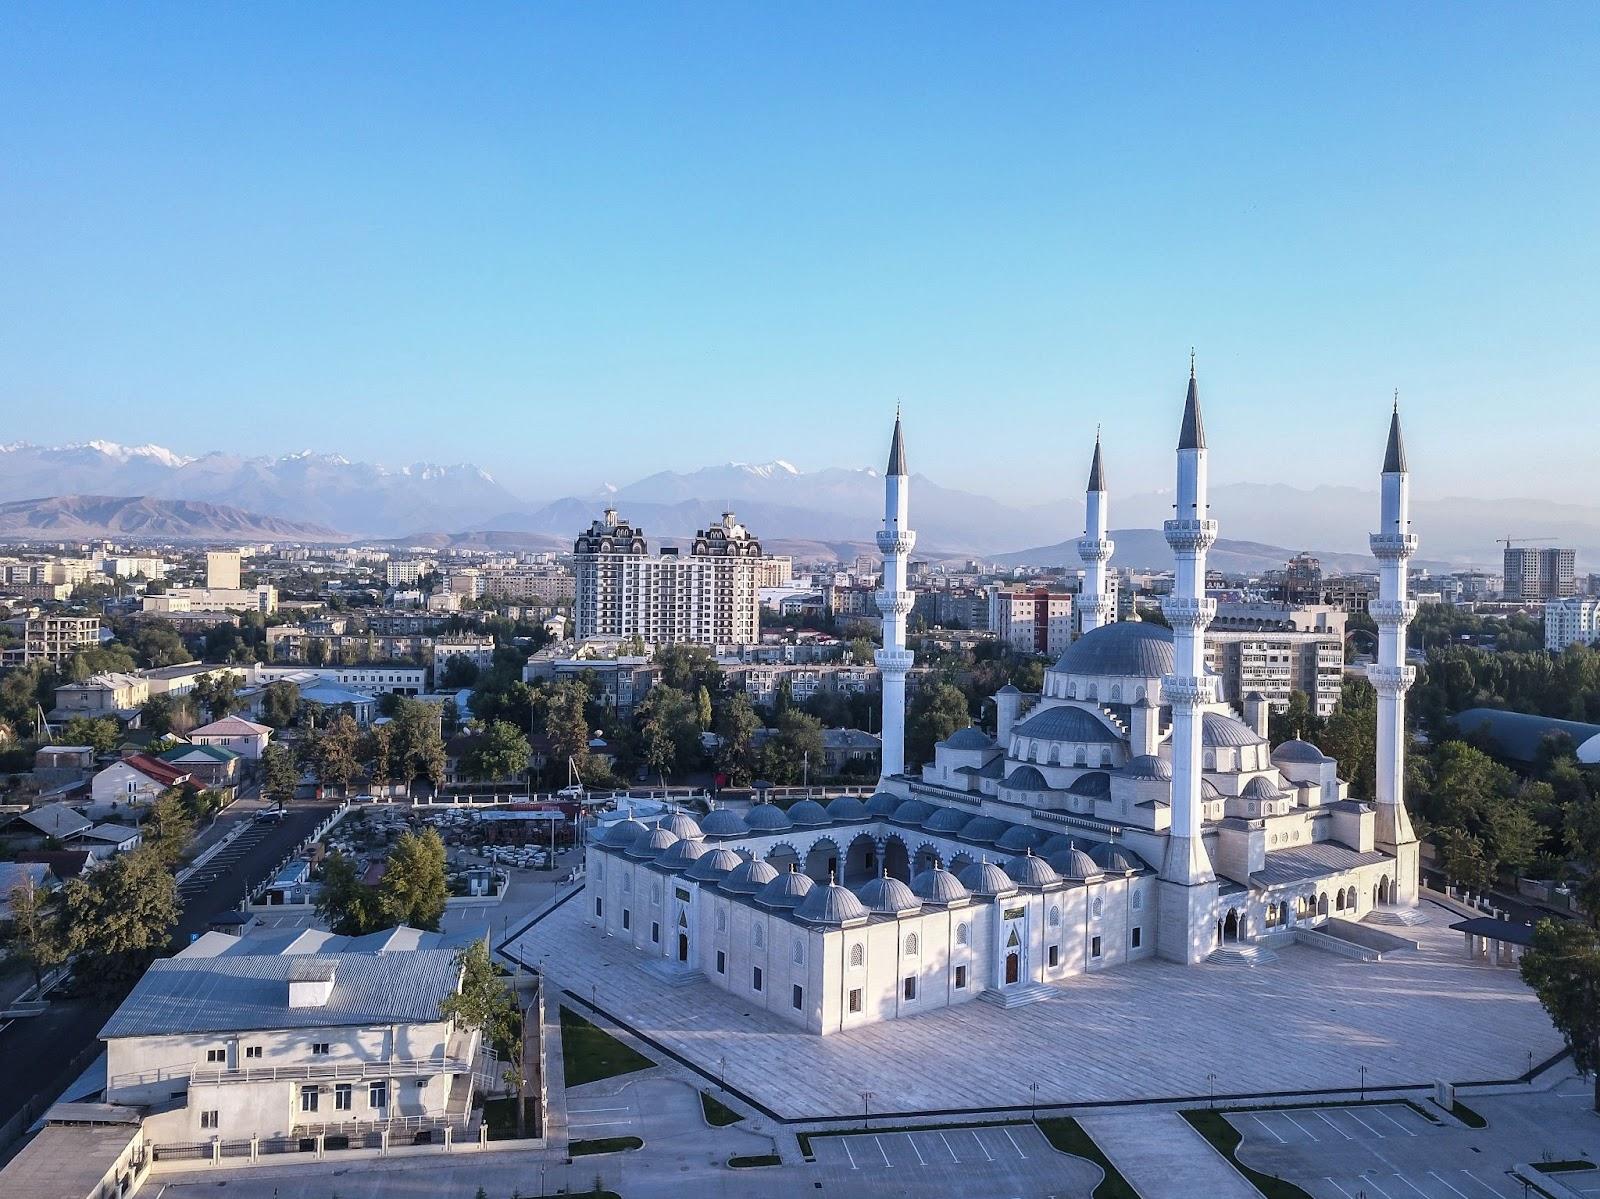 The Central Mosque of Imam Sarakhsi, in the Kyrgyz capital Bishkek.